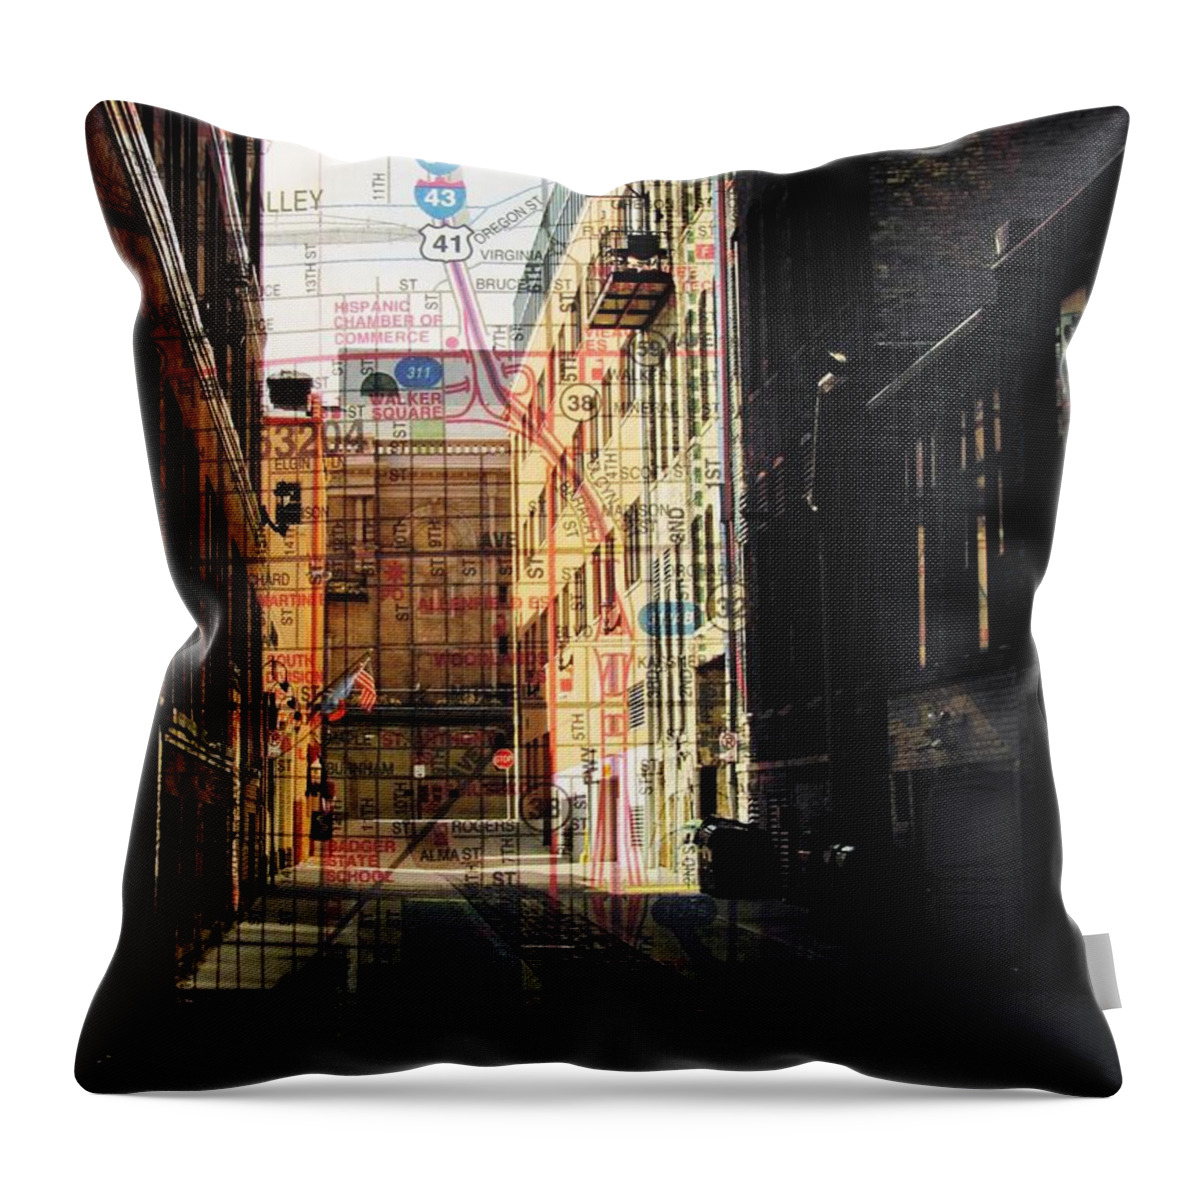 Fusion Foto Art Throw Pillow featuring the digital art Alley Front Street w Map by Anita Burgermeister